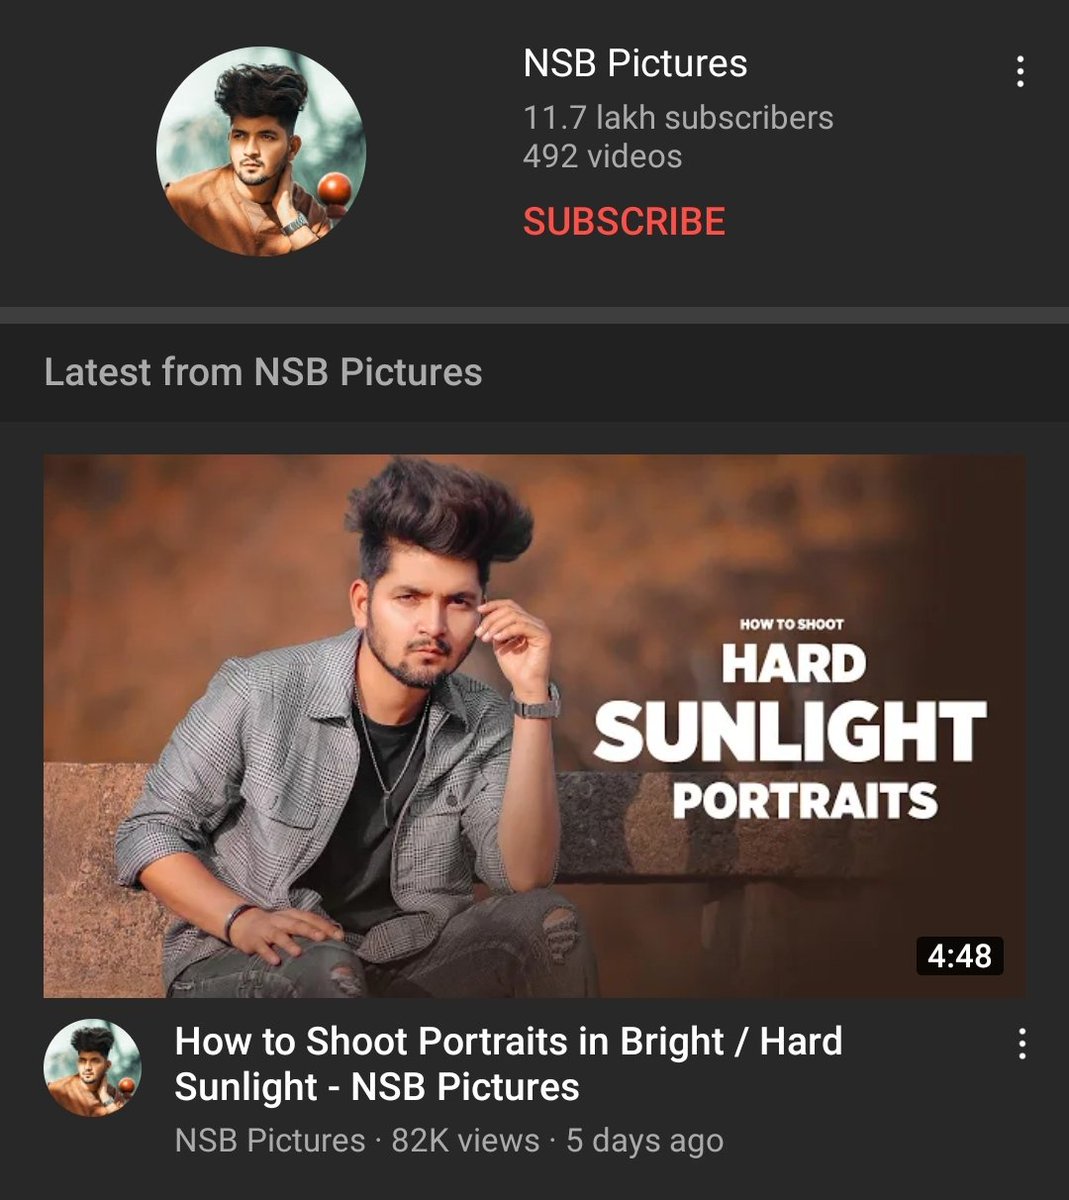 Hey @Adobe @incoproip Neraj the admin
&created of Nsbpictures is creating great content
and. We are able to learn a lot by his Chanel.
If you notice, He is somehow also
promoting Adobe softwares. So please take back
the copyright strikes #nsbpictures #HelpNsbPictures